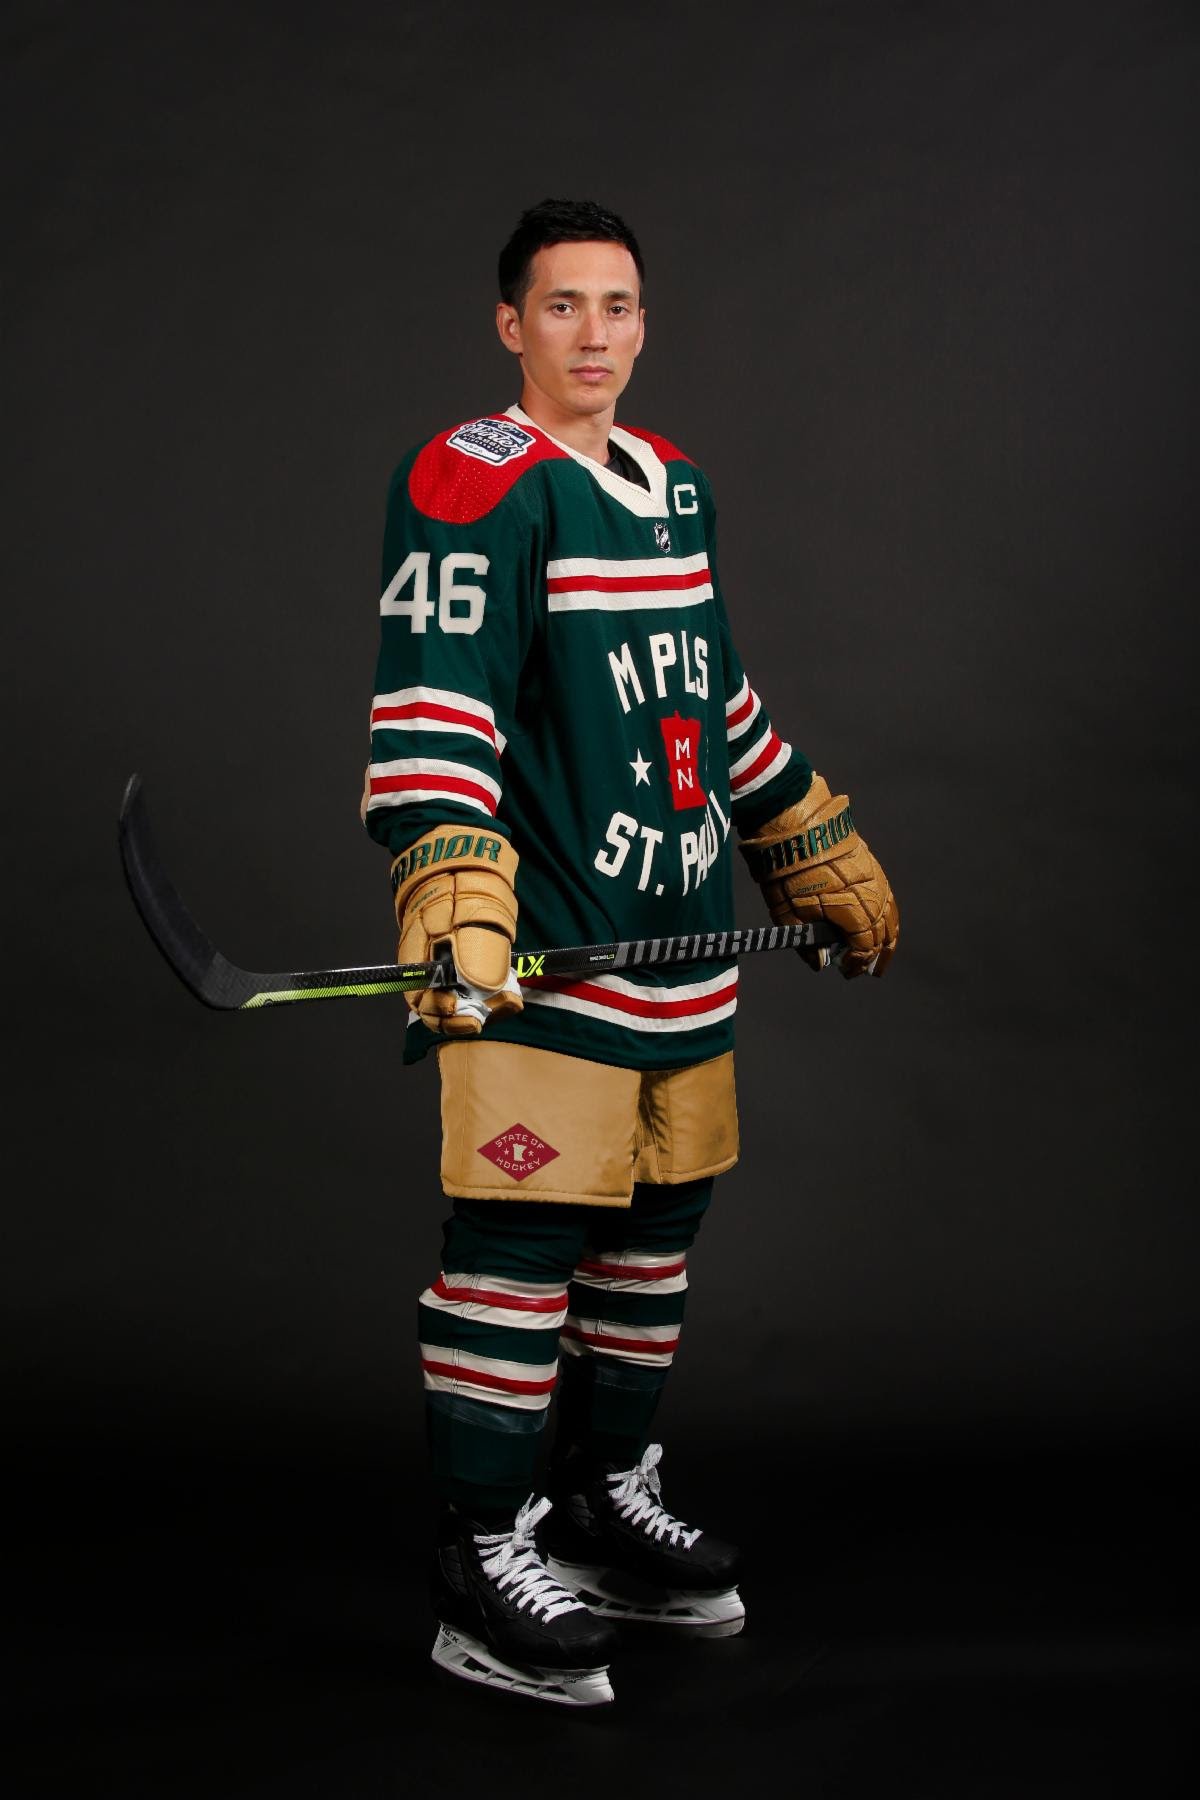 NHL on X: The @mnwild wore some special warmup jerseys for